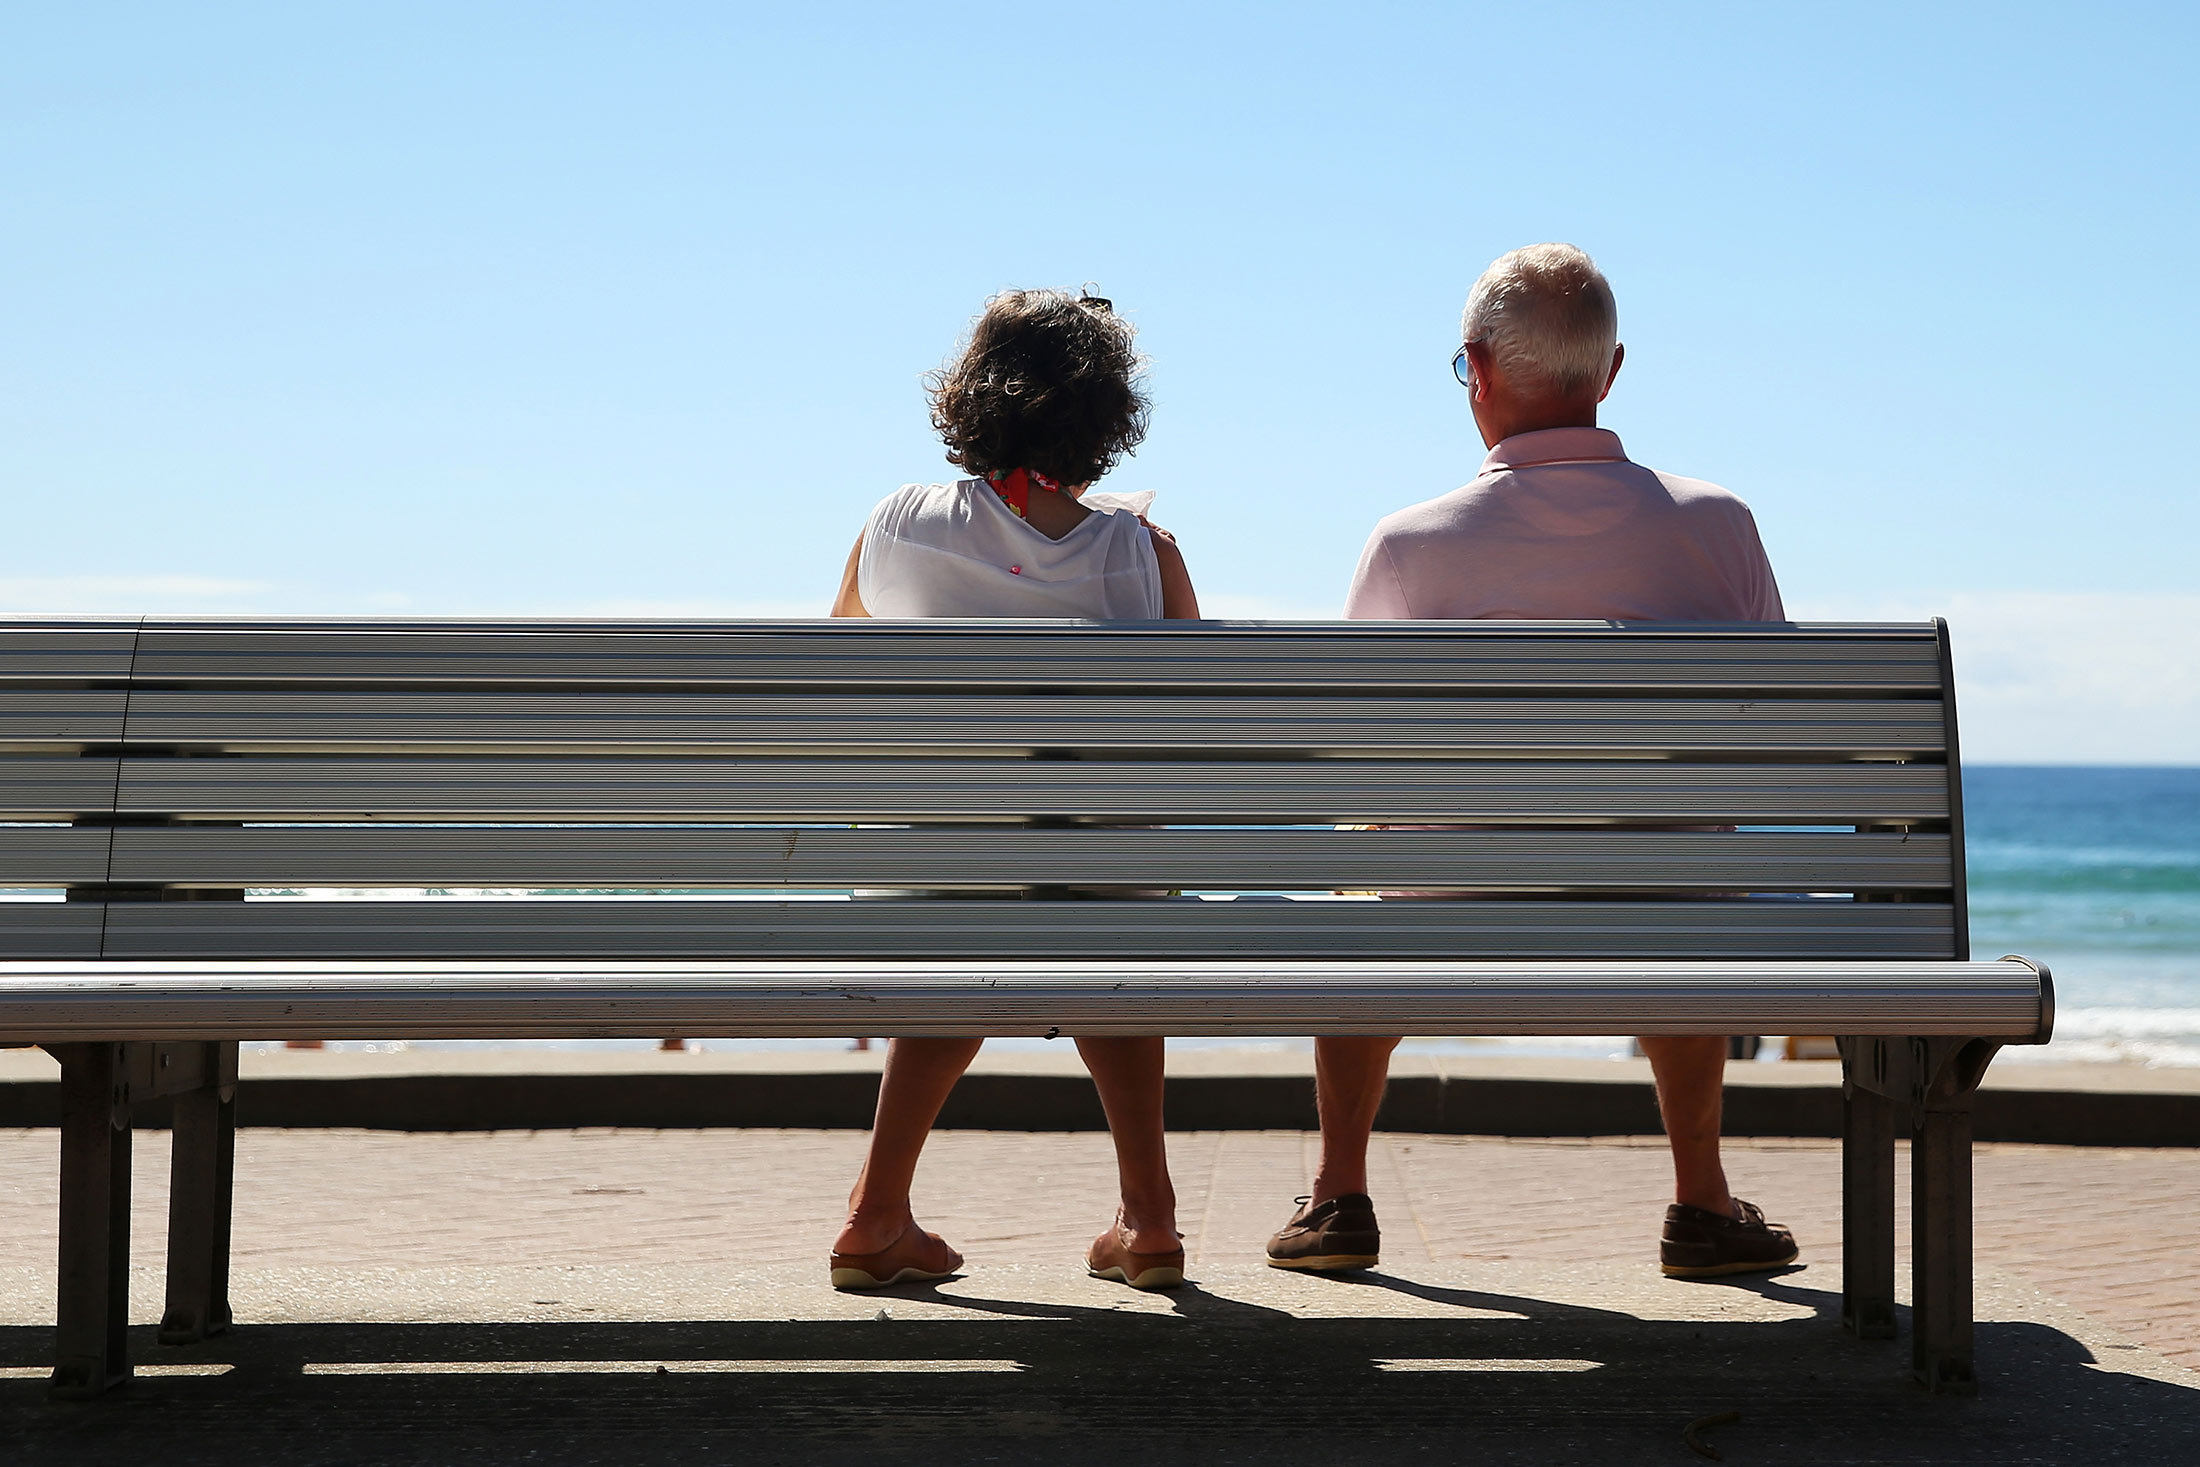 A woman, left, and a man look on as they sit on a bench at a beach in Sydney, Australia, on Wednesday, April 1, 2015. The number of people in Australia aged 65 and over is expected to double by 2055.
